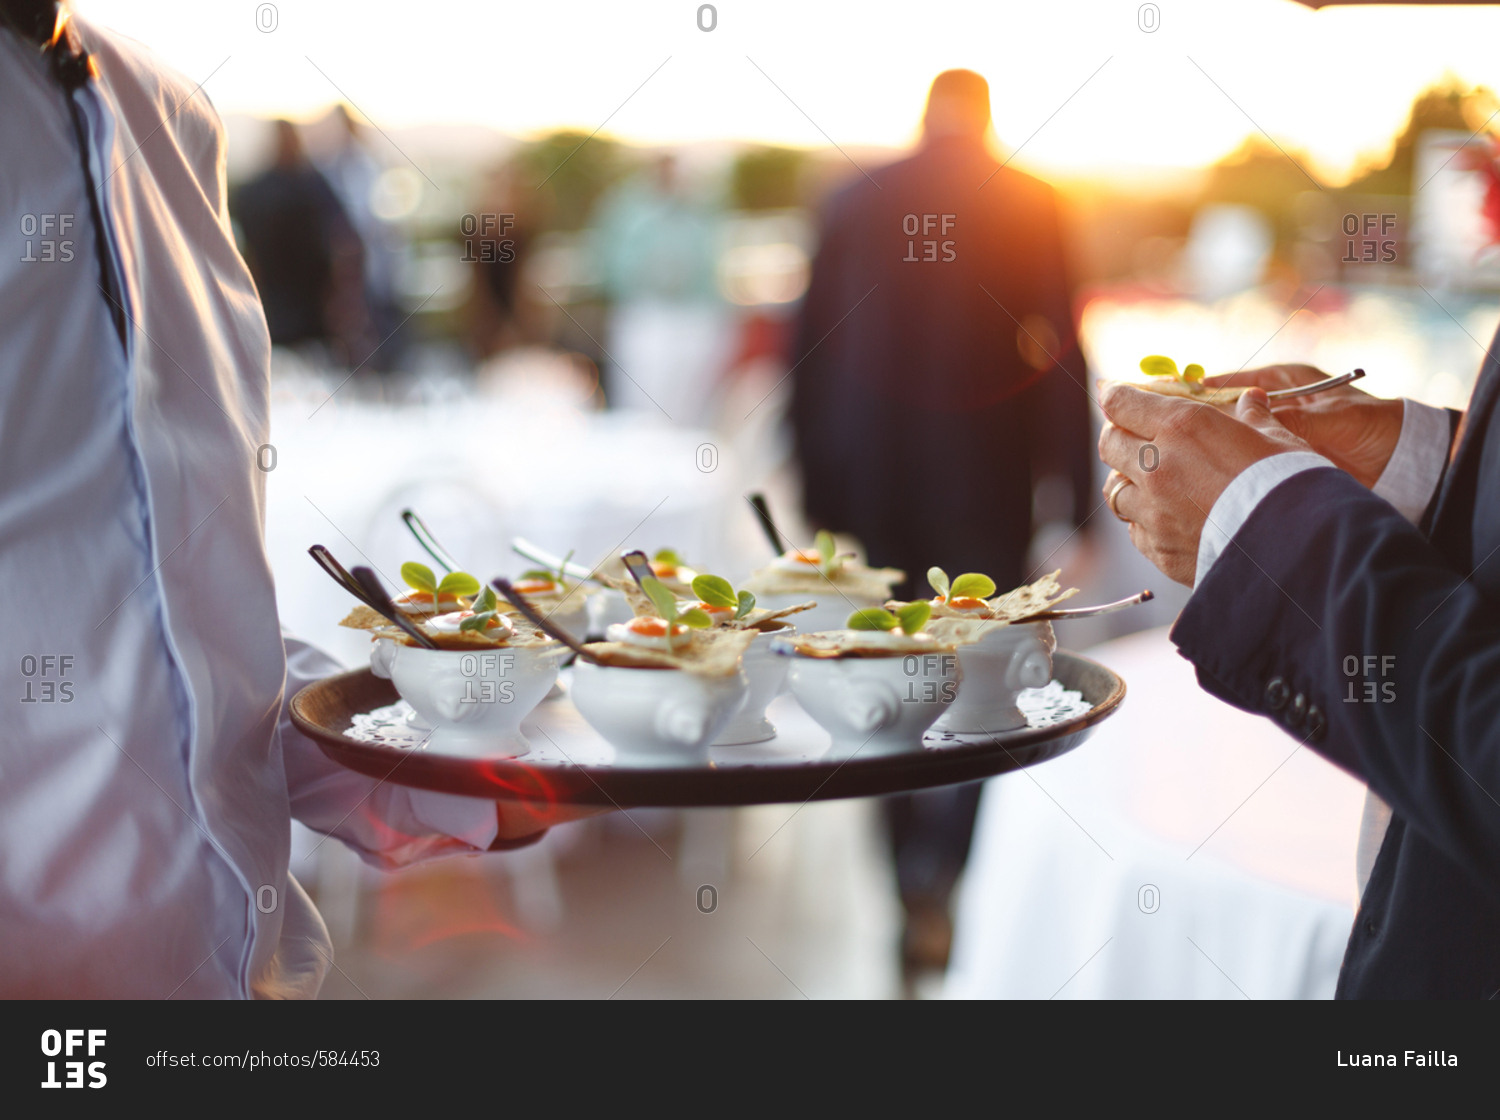 Waiter holding a serving tray with hors d'oeuvres in small dishes